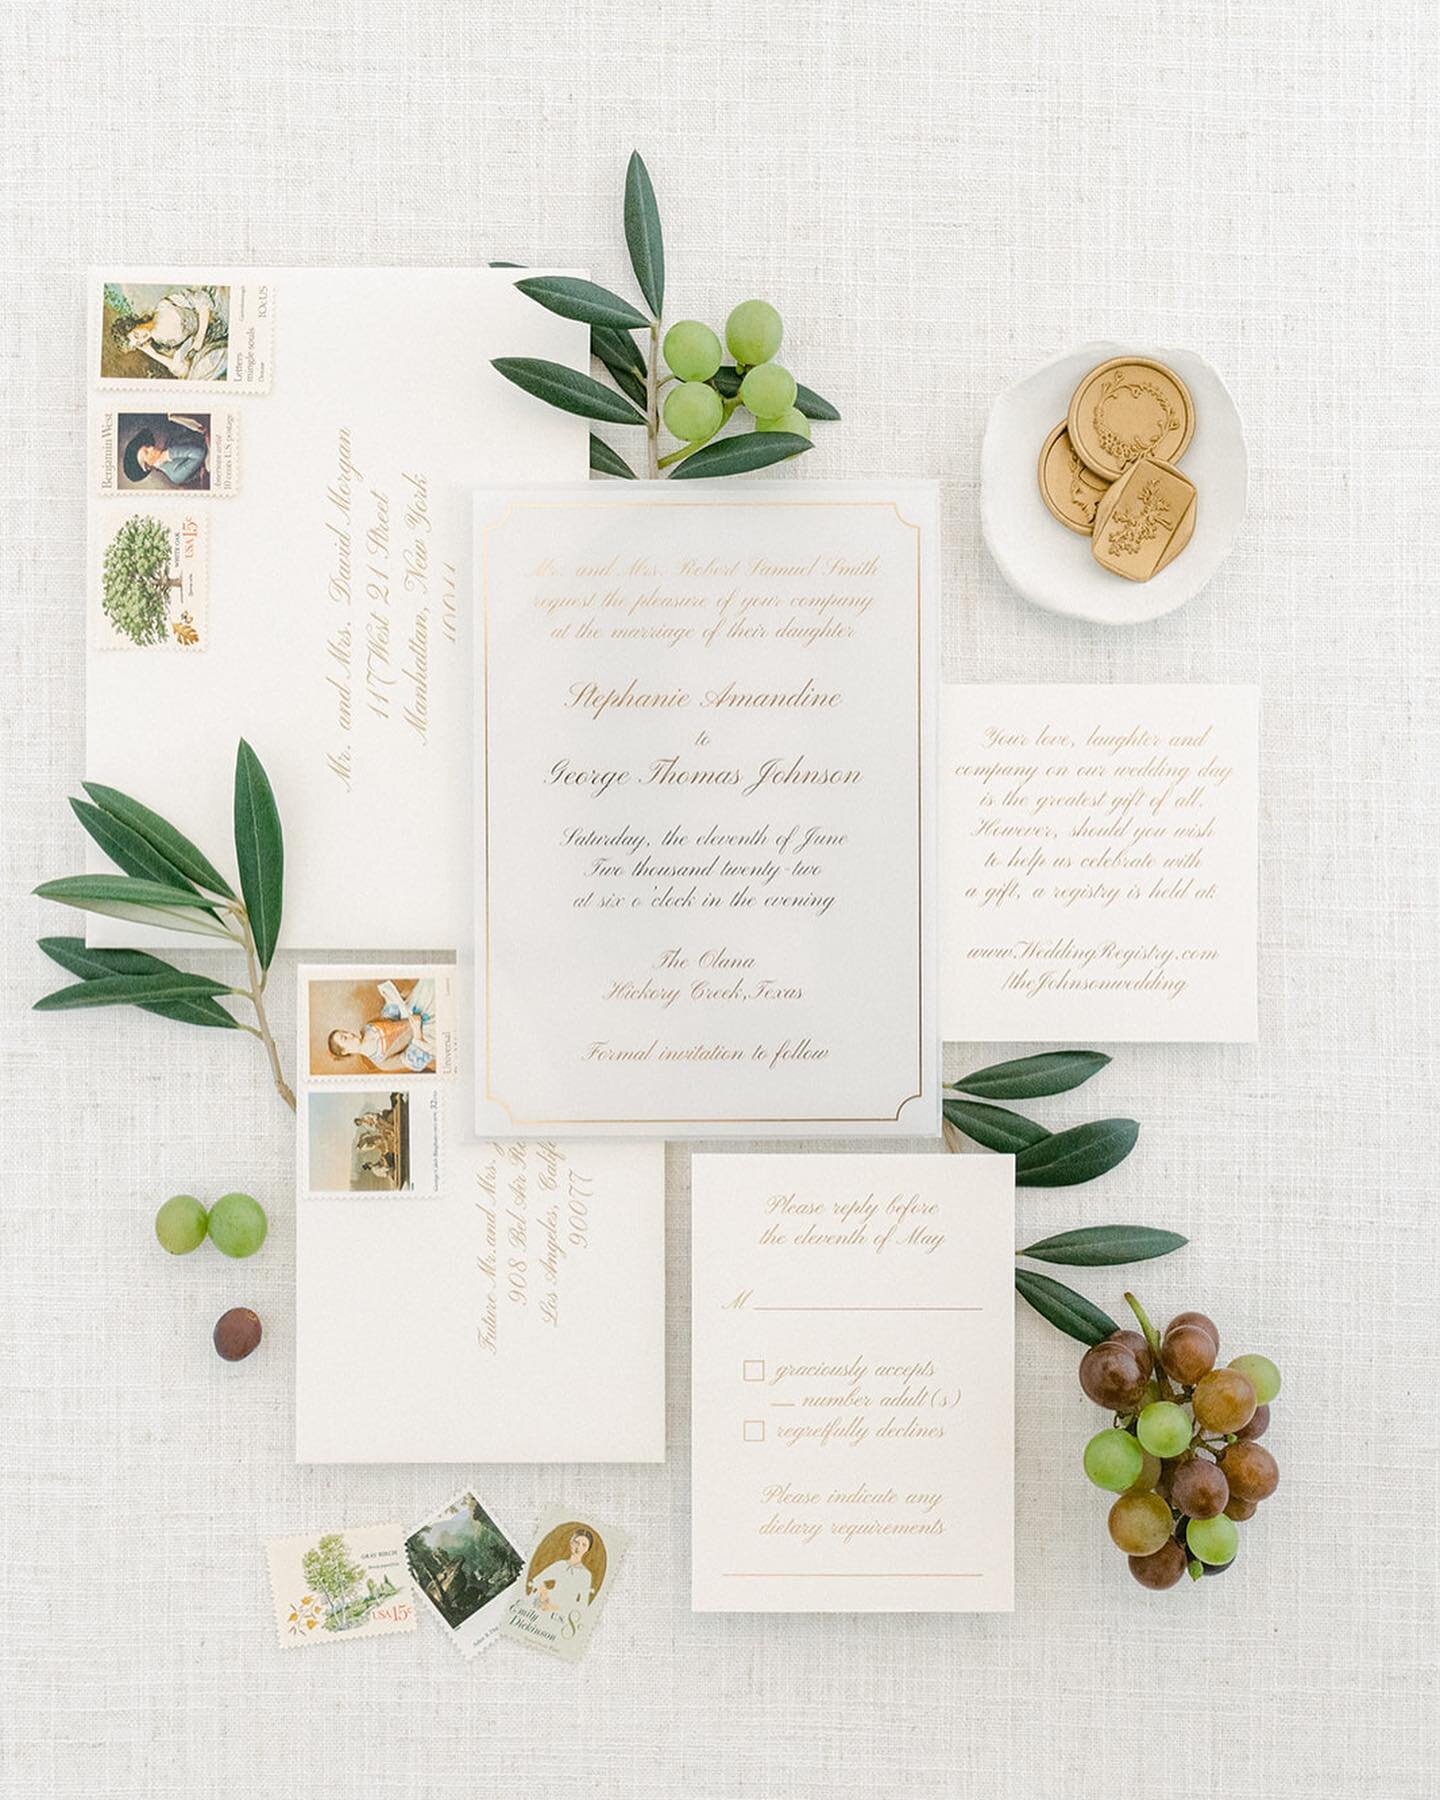 White acrylic and gold foil! A timeless combinaton for couples who want to bring a moden twist, to a classic design.

Thank you @bybhavikaphotography for photographing our stationery suites with so much love, care and attention. The end results are j